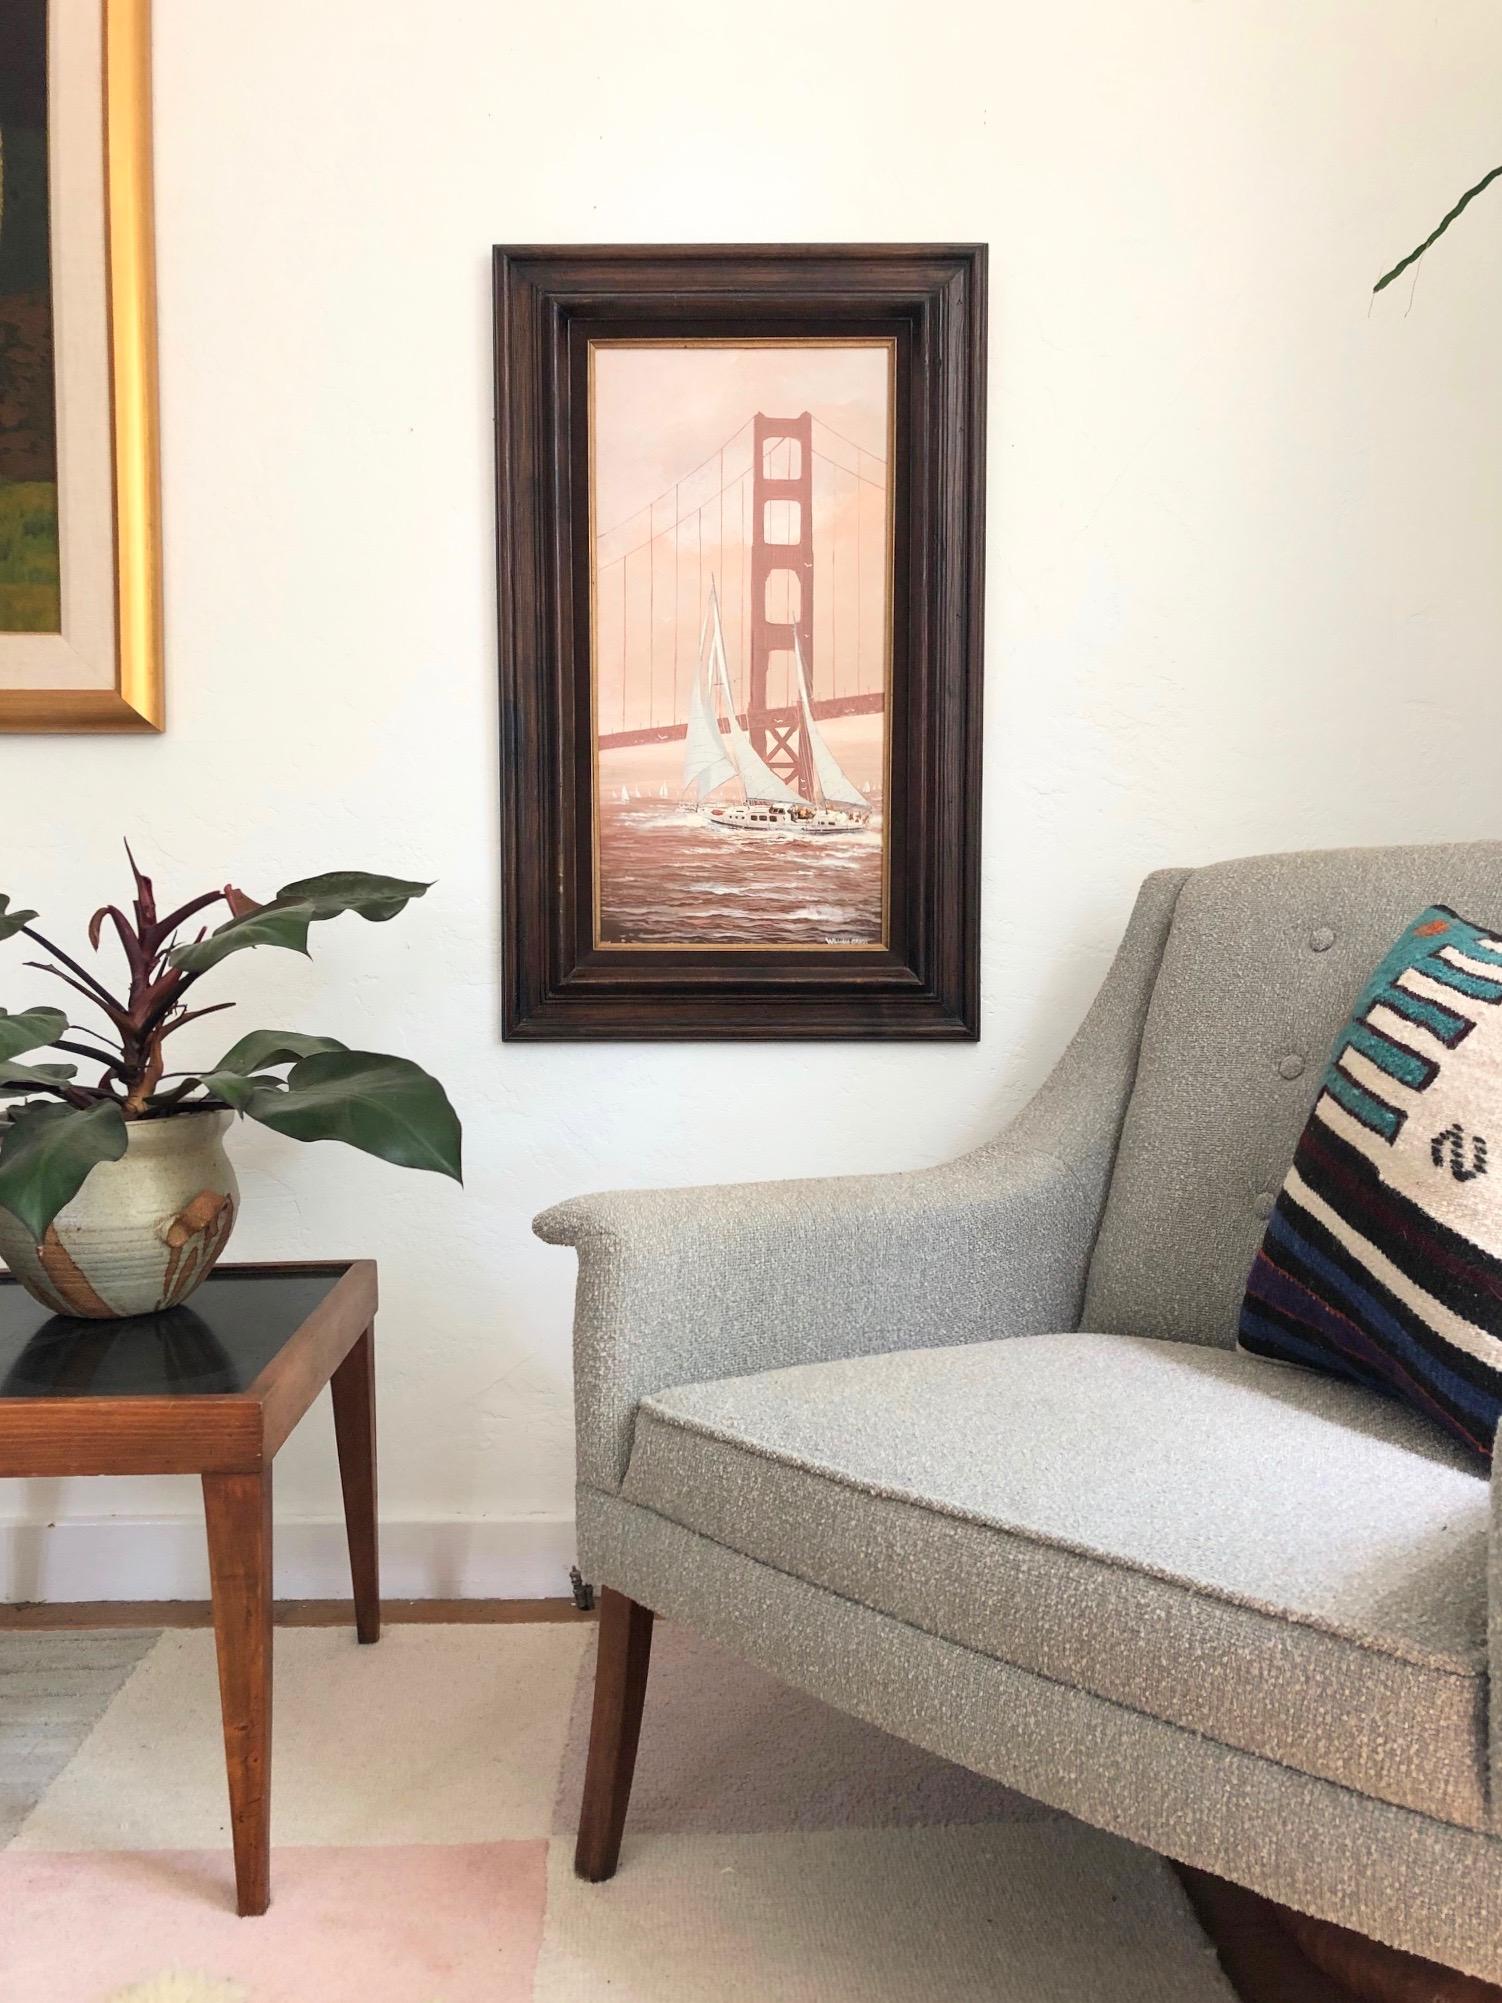 An original vintage oil on canvas painting of a San Francisco Seascape. Features the image of a boat in the waves under the Golden Gate Bridge. Nice monochromatic muted red and white color pallette. Painted in 1983 by William Gregg. Titled 